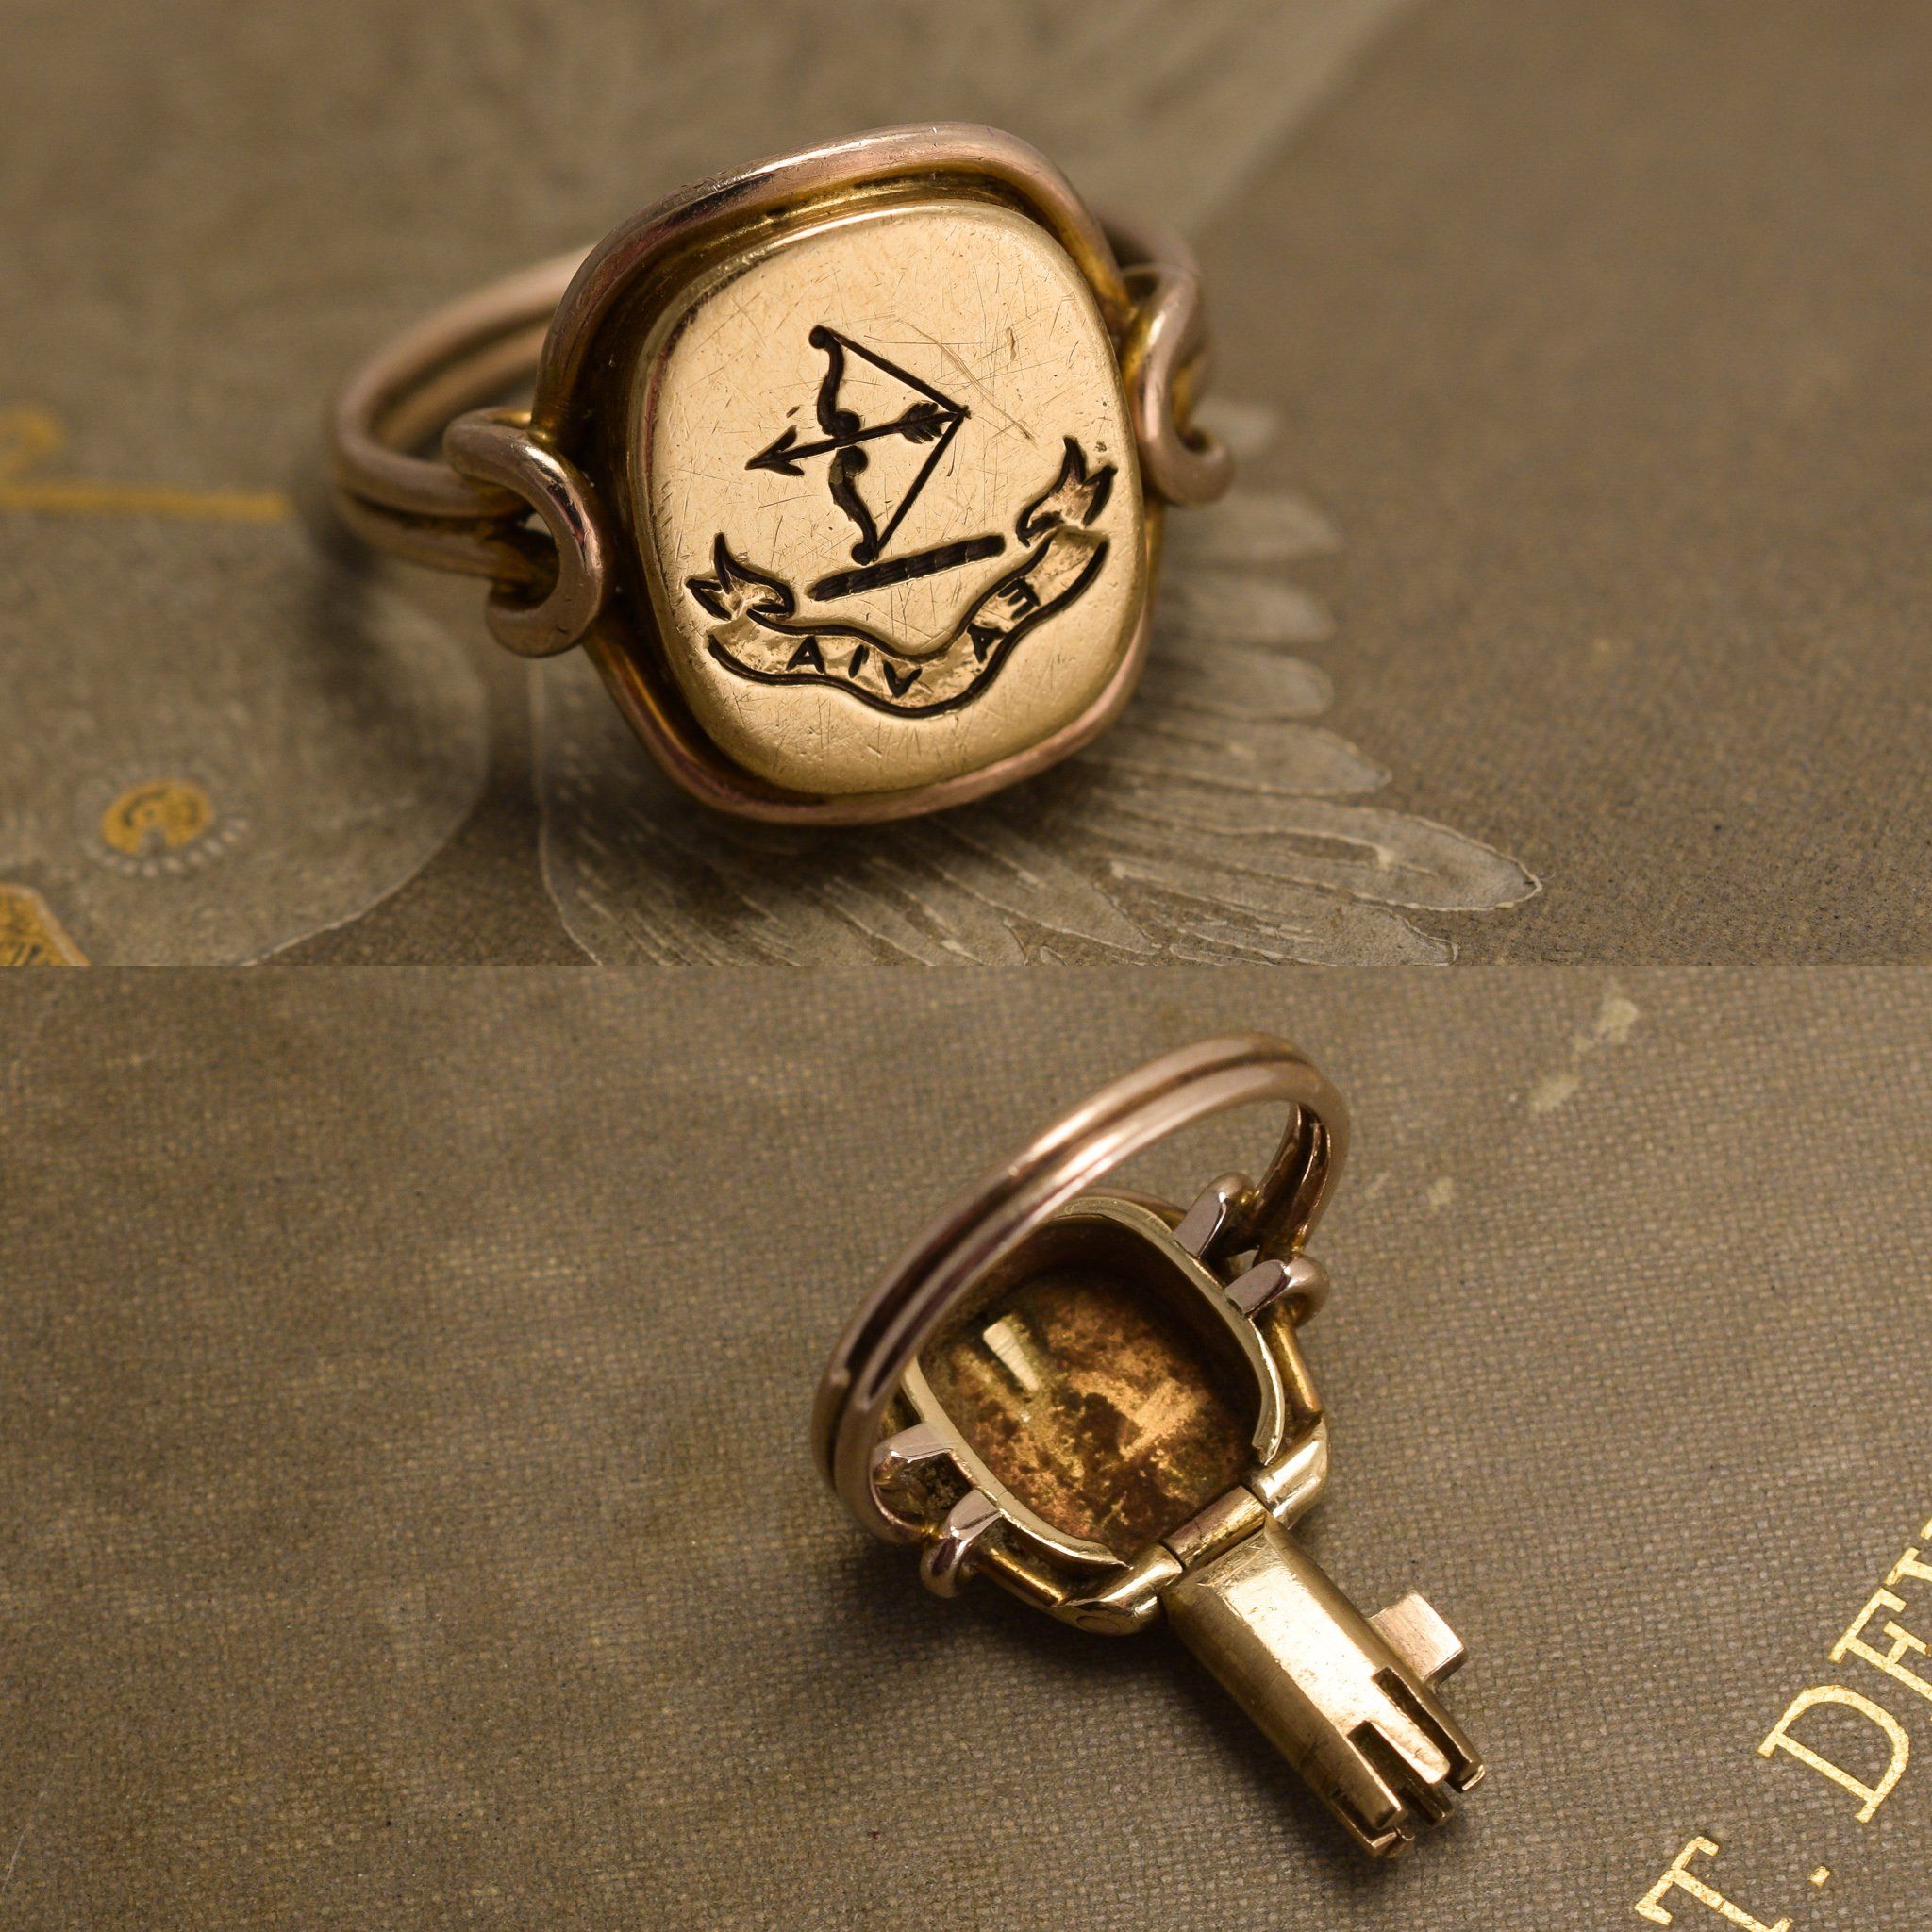 Detail of "Ea Via" Bow and Arrow Signet Ring with Concealed Key